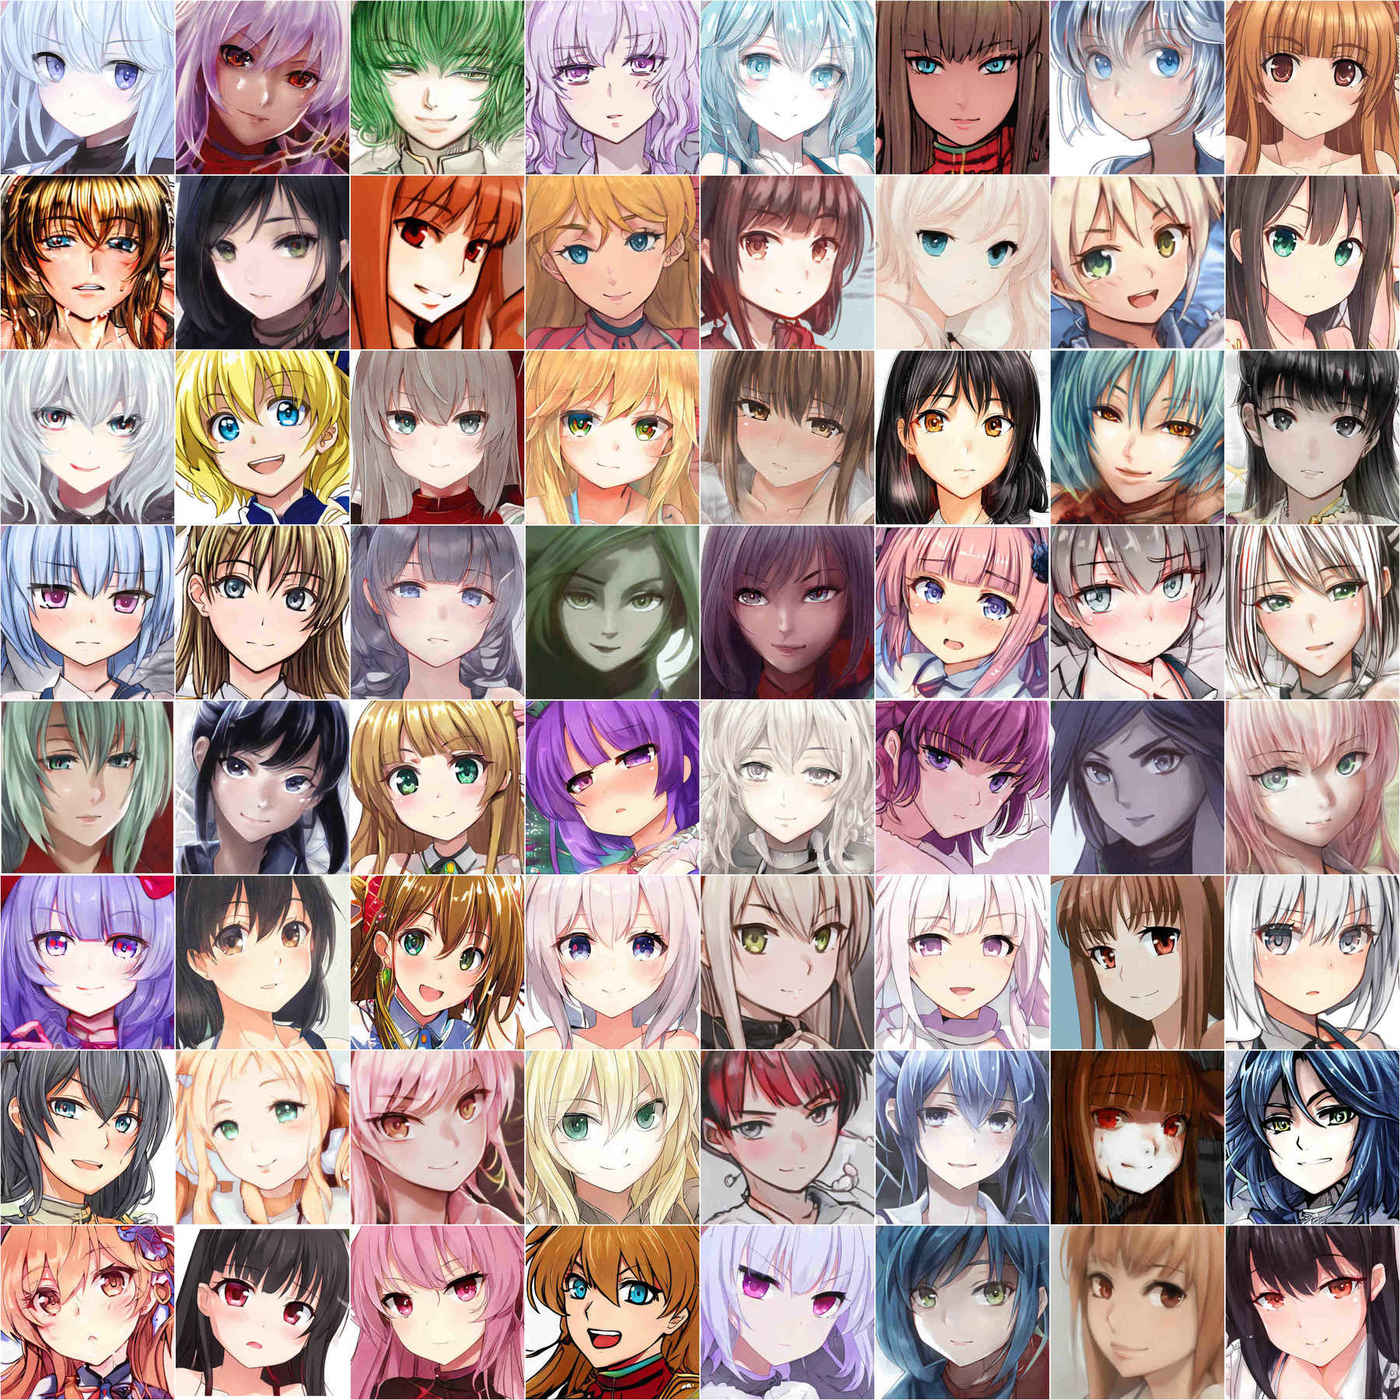 64 of the best TWDNE anime face samples selected from social media (click to zoom).